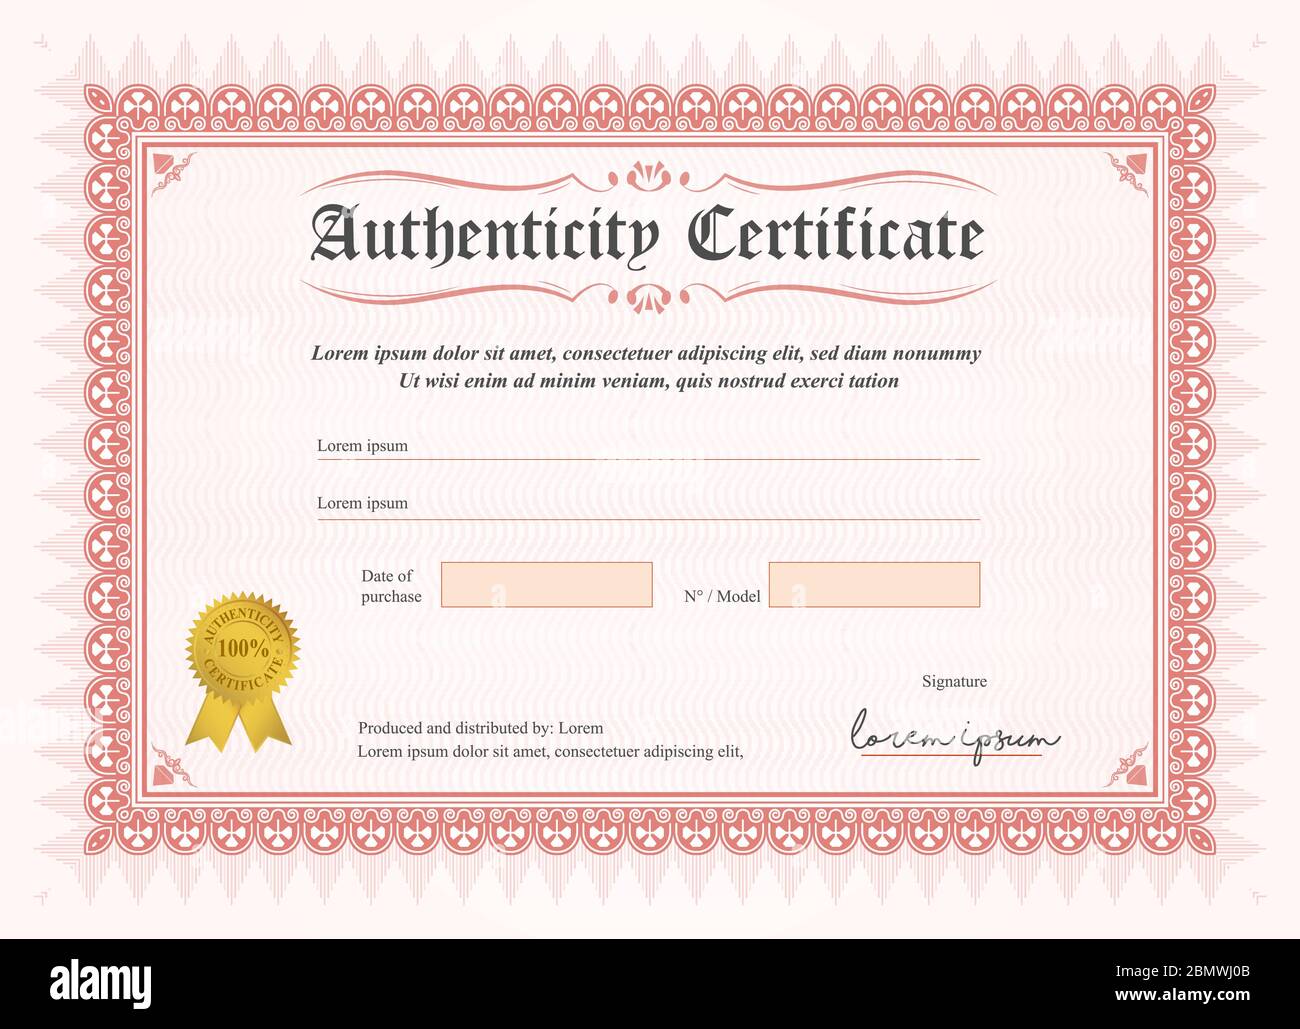 Certificate of authenticity, vector illustration with watermark and stamp. A5 format Stock Vector